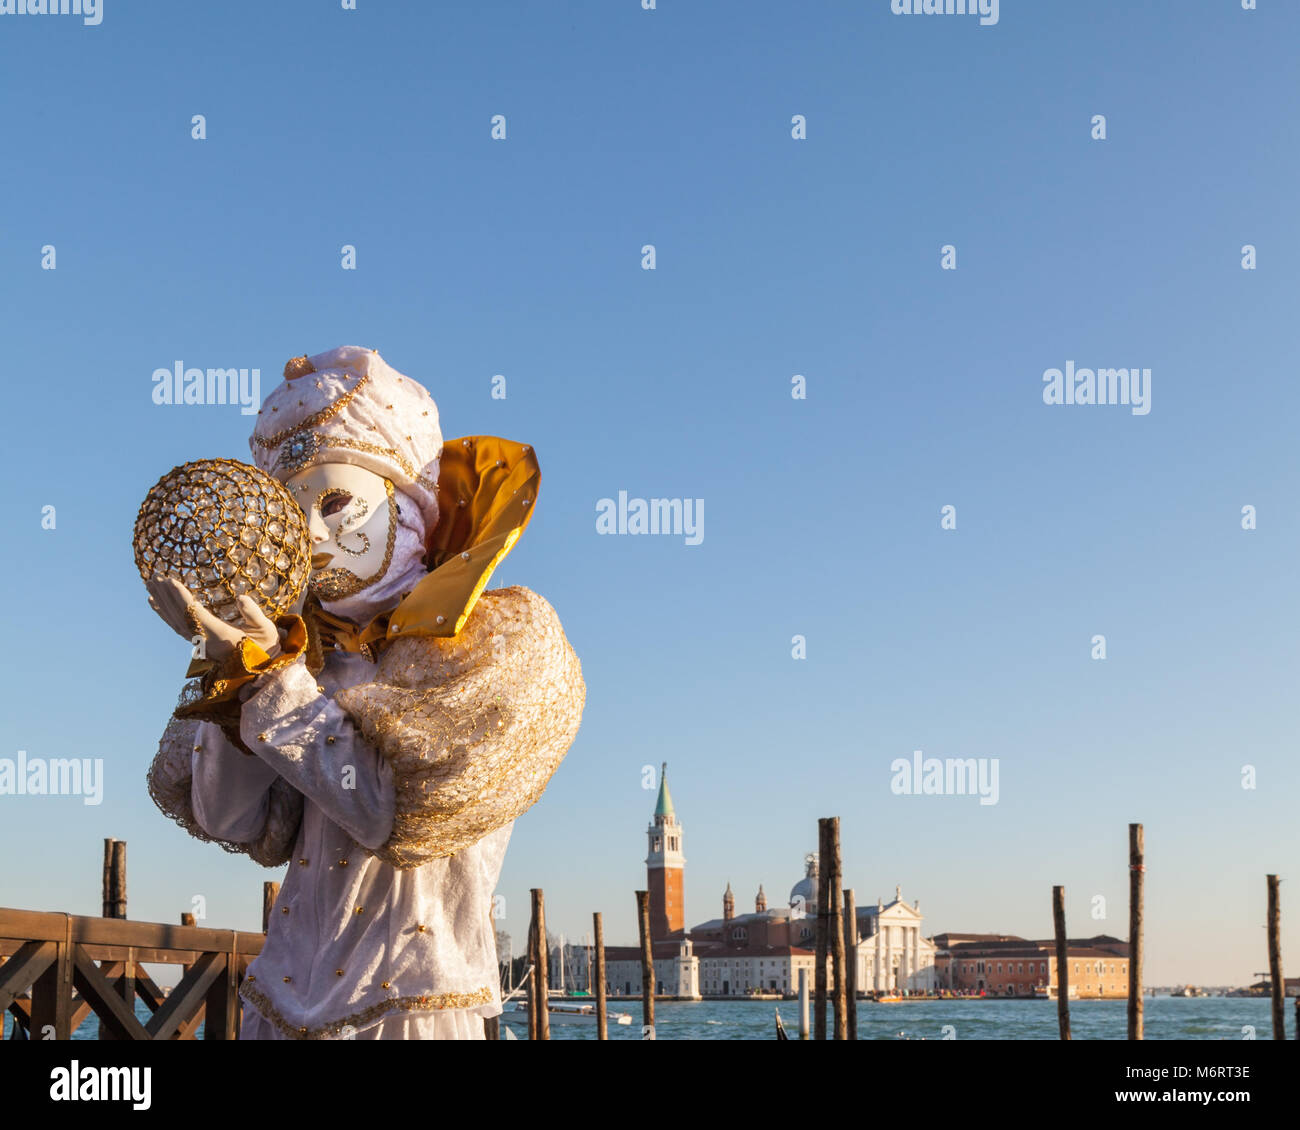 Participants in colourful arlecchino harlequin fortune teller costume and  mythical oriental outfit pose, Carnevale Di Venezia, Venice Carnival, Italy  Stock Photo - Alamy